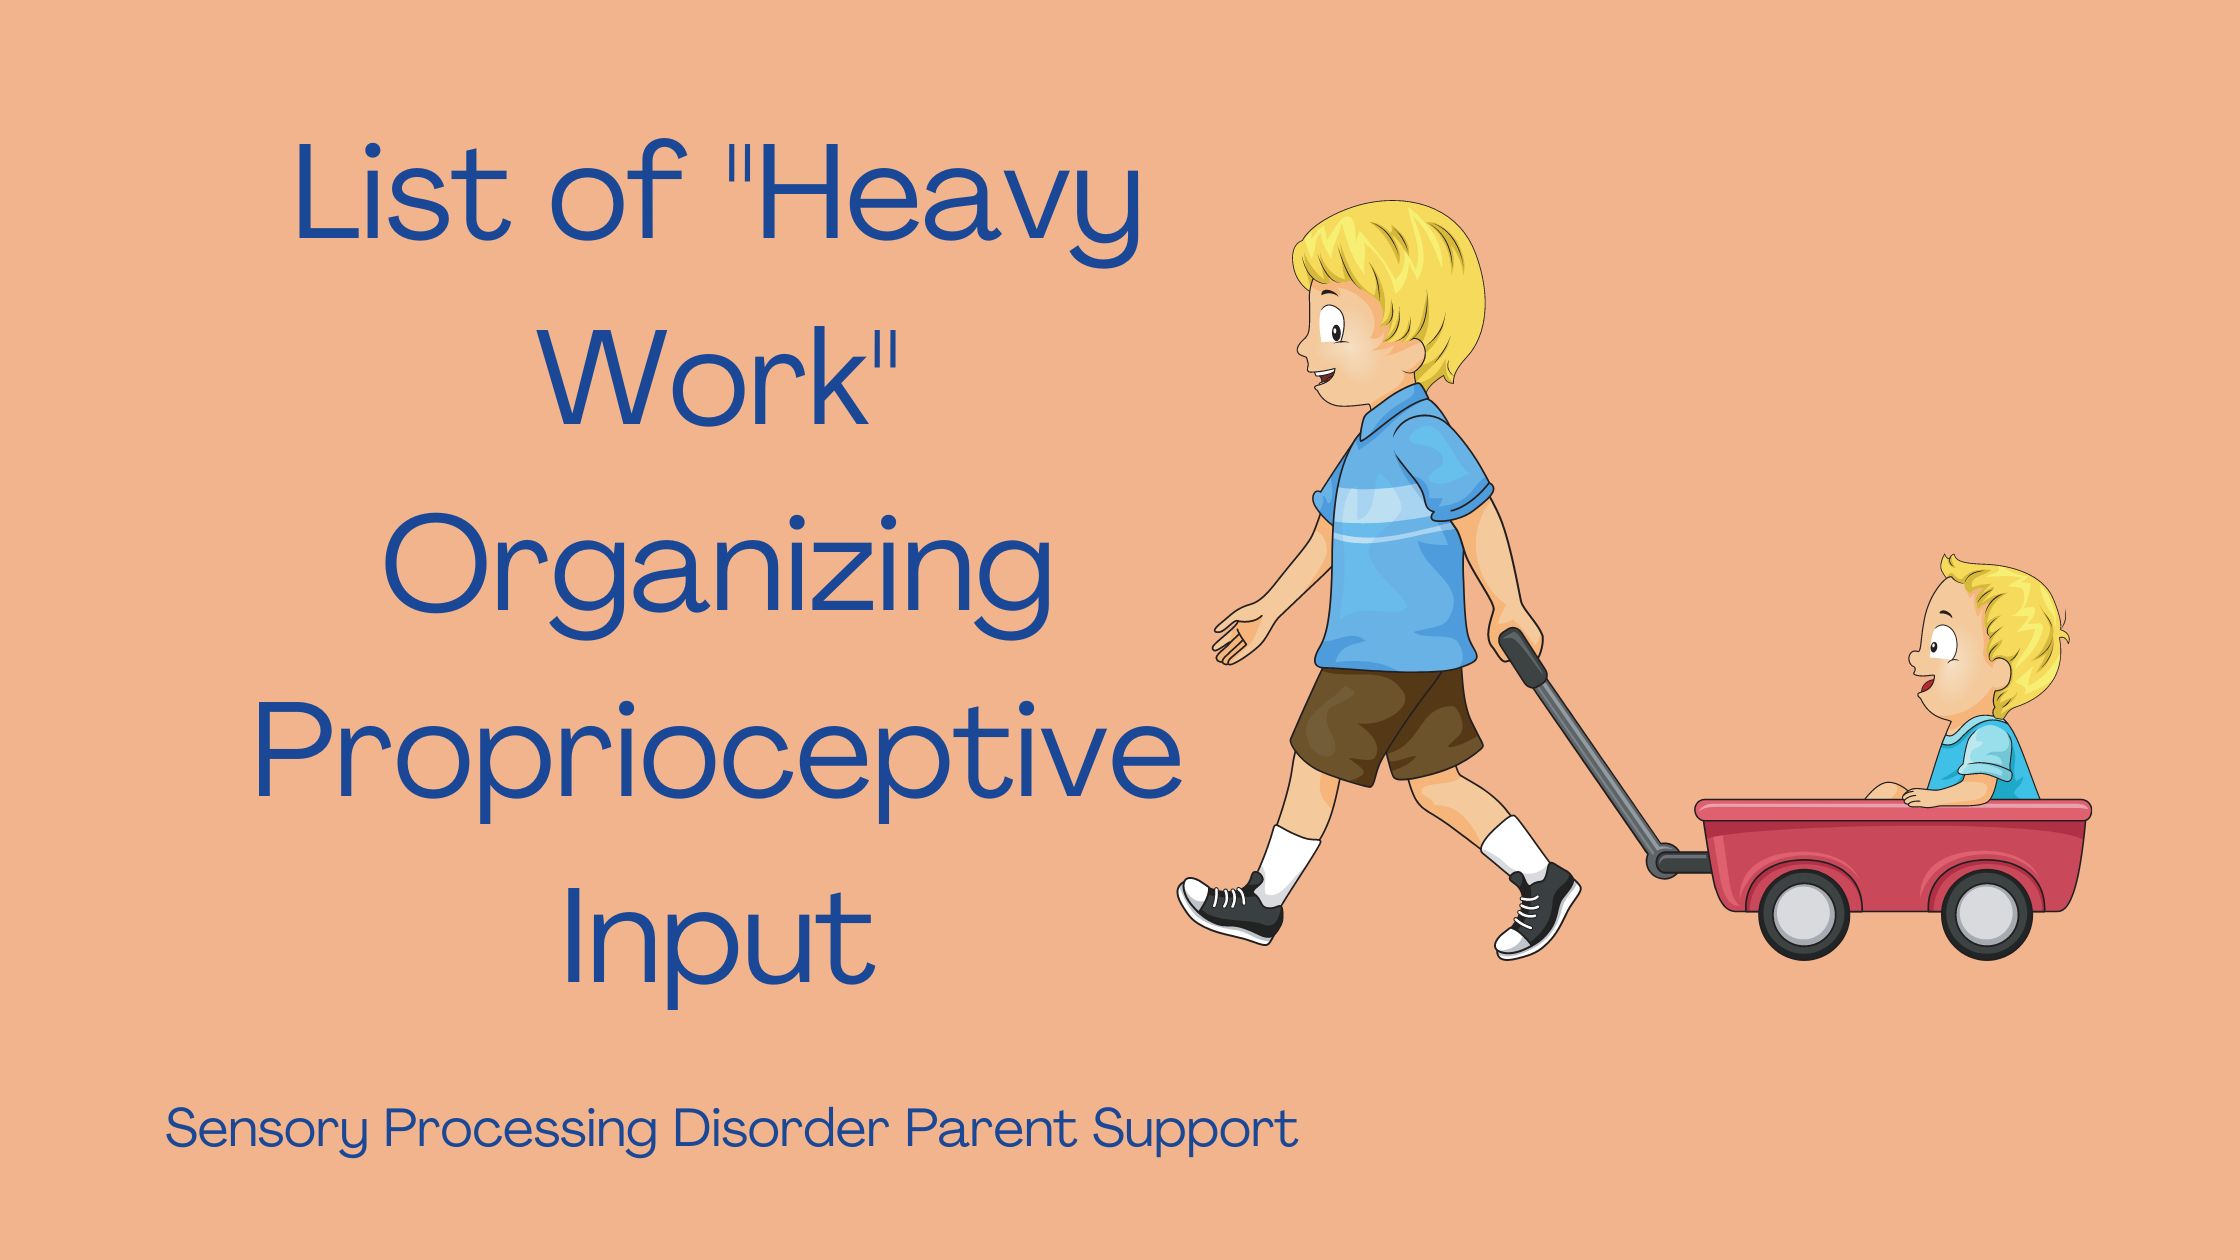 boy with sensory processing disorder doing heavy work activities pulling wagon with a child in it List of 